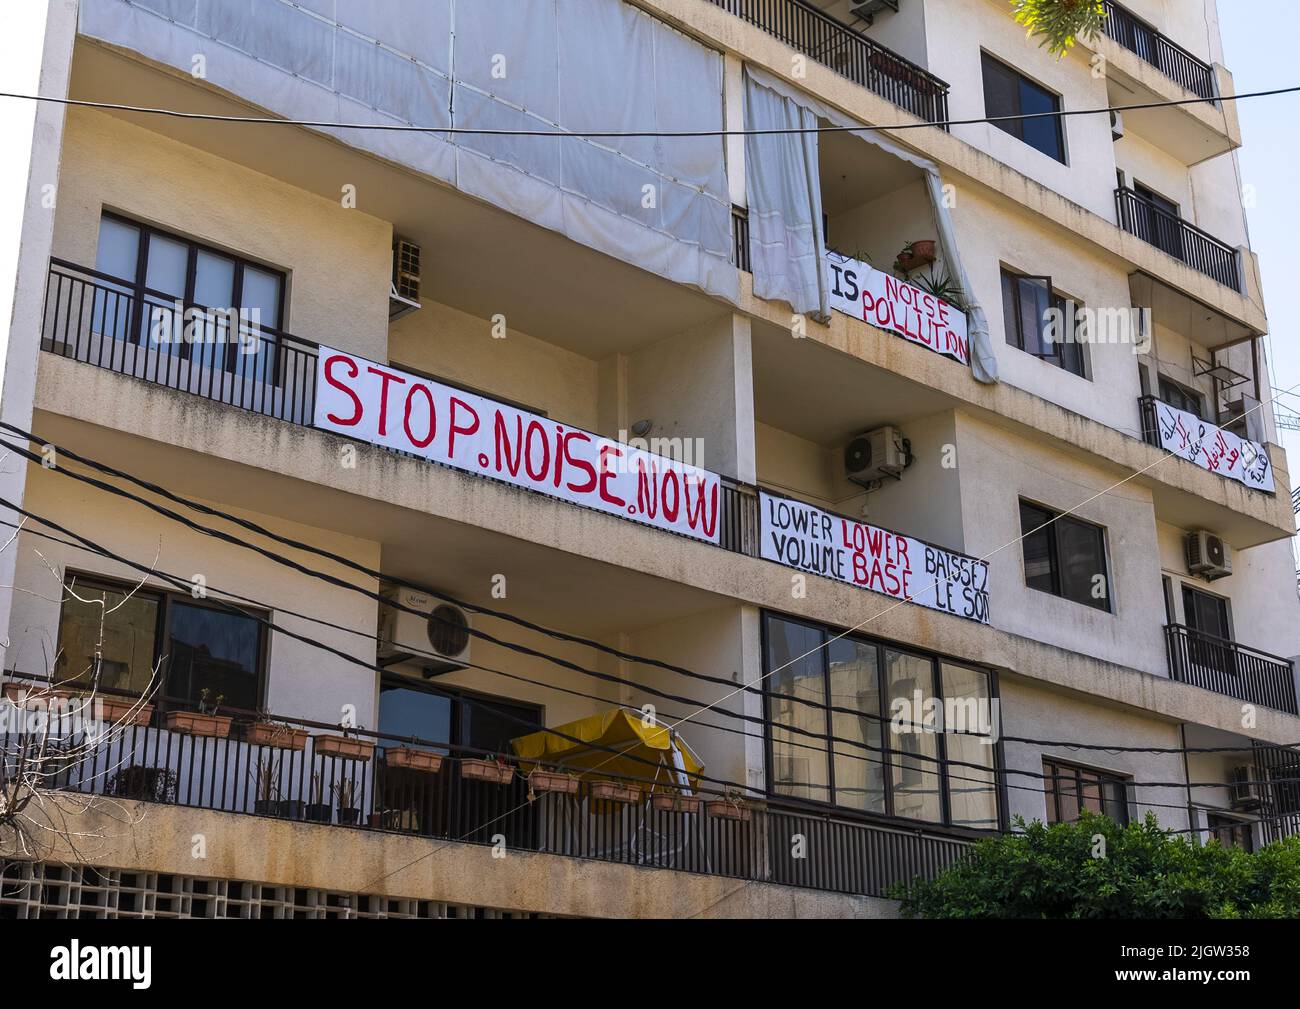 Apartements in Mar Mikhael with anti noise billboards, Beirut Governorate, Beirut, Lebanon Stock Photo